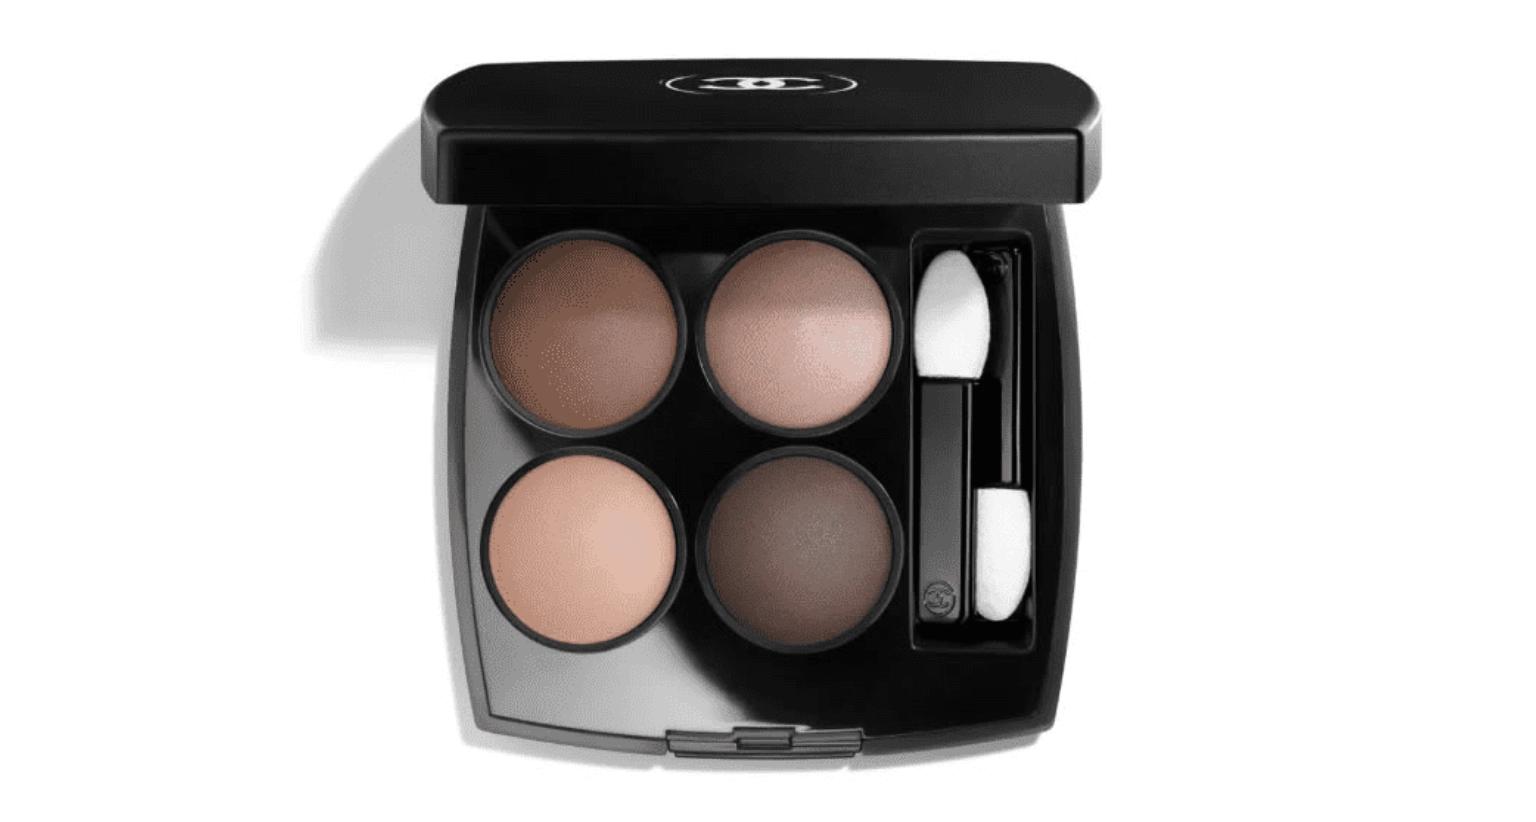 Chanel Les 4 Ombres Multi-Effect Quadra Eyeshadow 308 Clair-Obscur